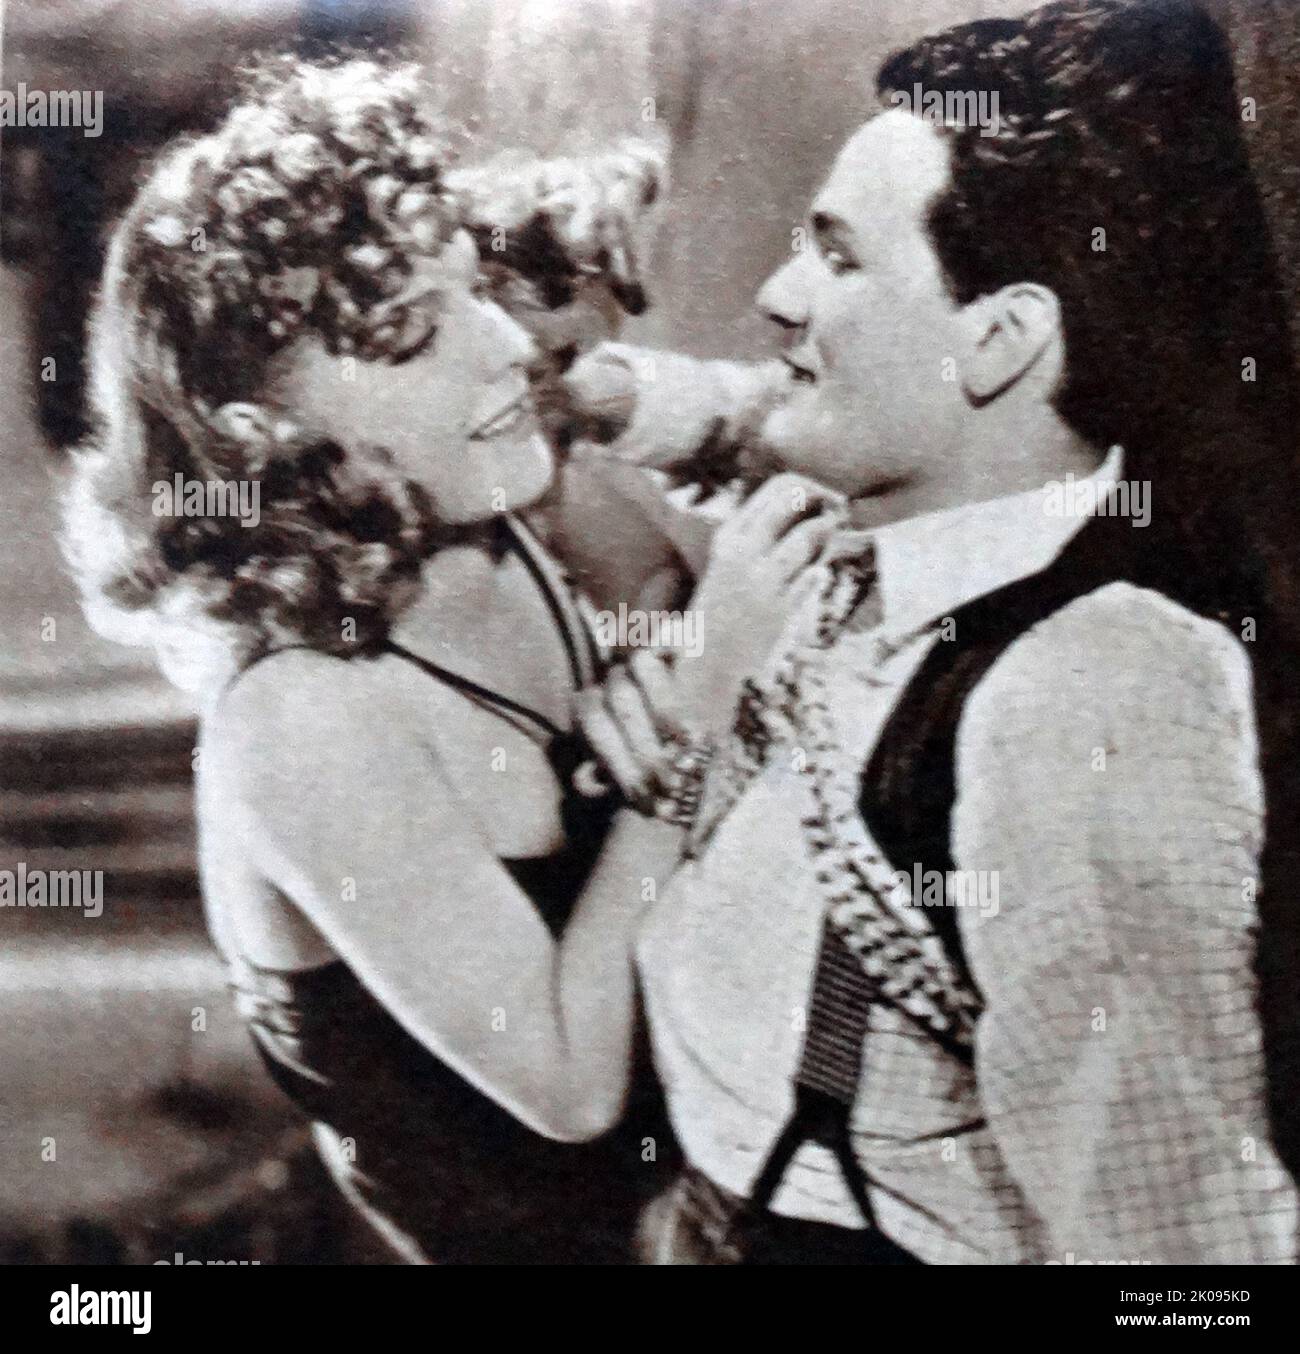 Ann Sheridan and John Gardfield in They Made Me a Criminal, a 1939 American crime drama film. Clara Lou 'Ann' Sheridan (February 21, 1915 - January 21, 1967) was an American actress and singer. John Garfield (born Jacob Julius Garfinkle, March 4, 1913 - May 21, 1952) was an American actor who played brooding, rebellious, working-class characters. Stock Photo